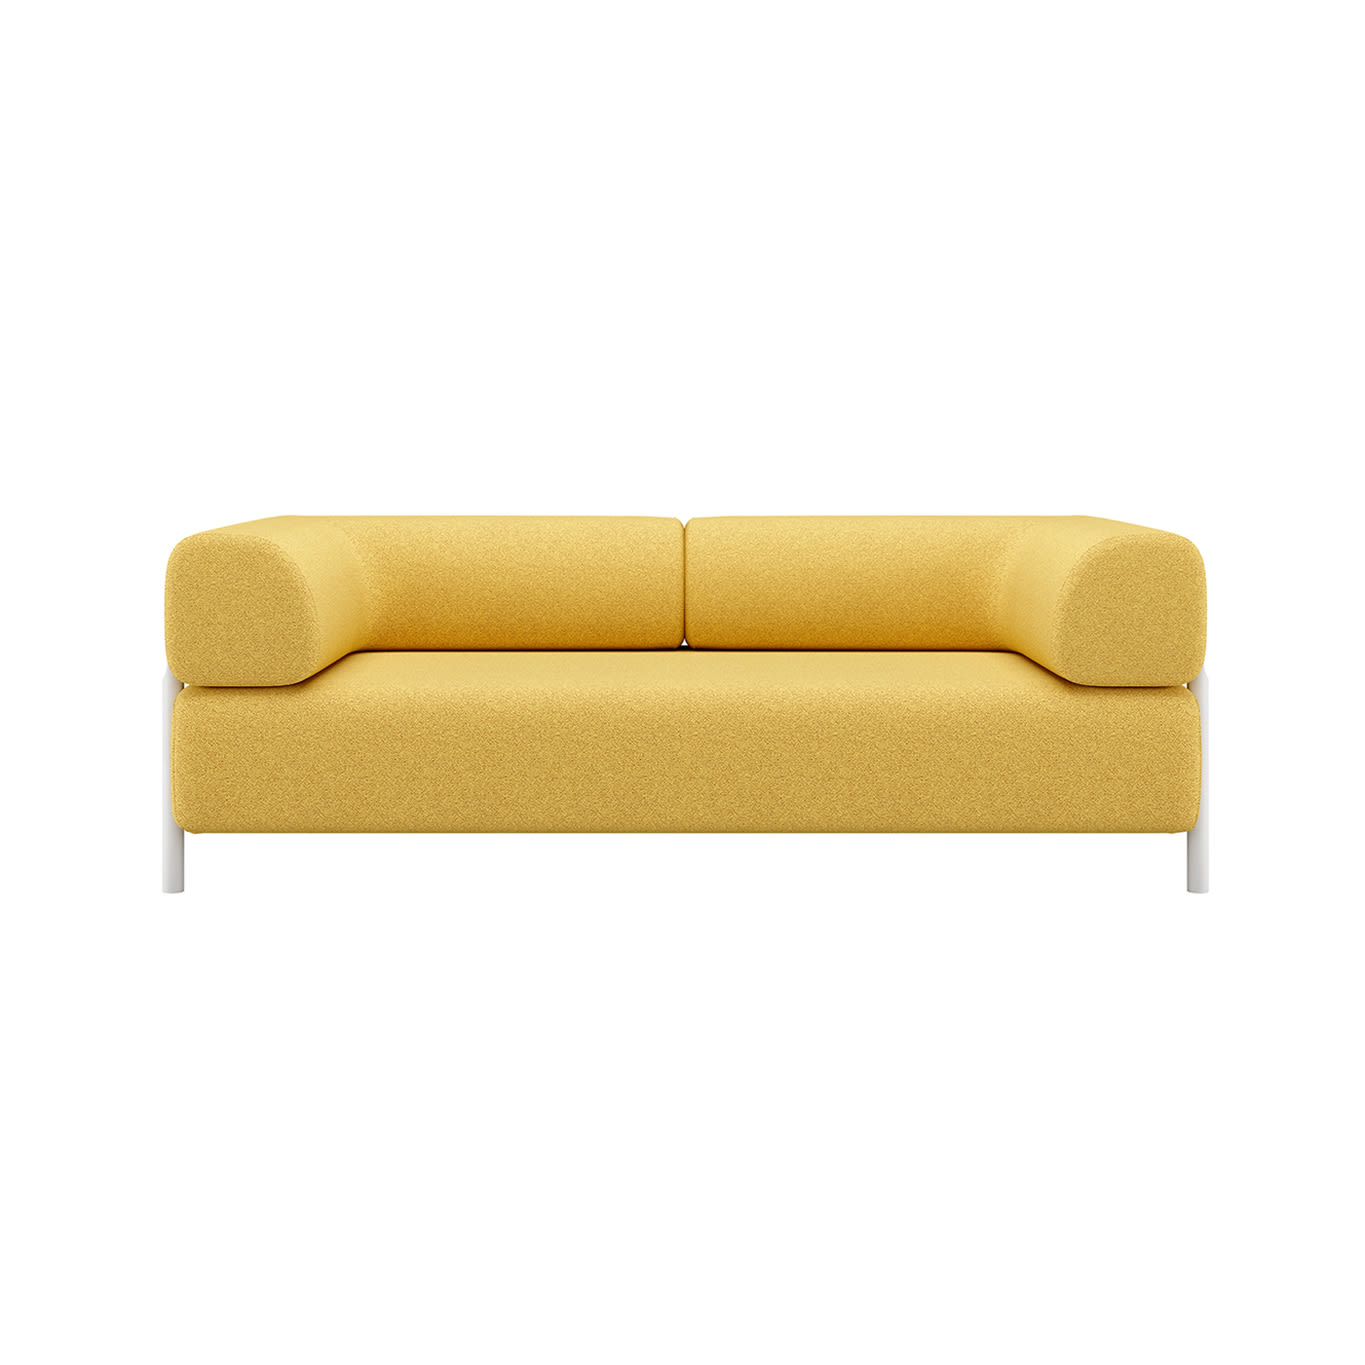 2-seater Sofa with Armrests, Sunflower